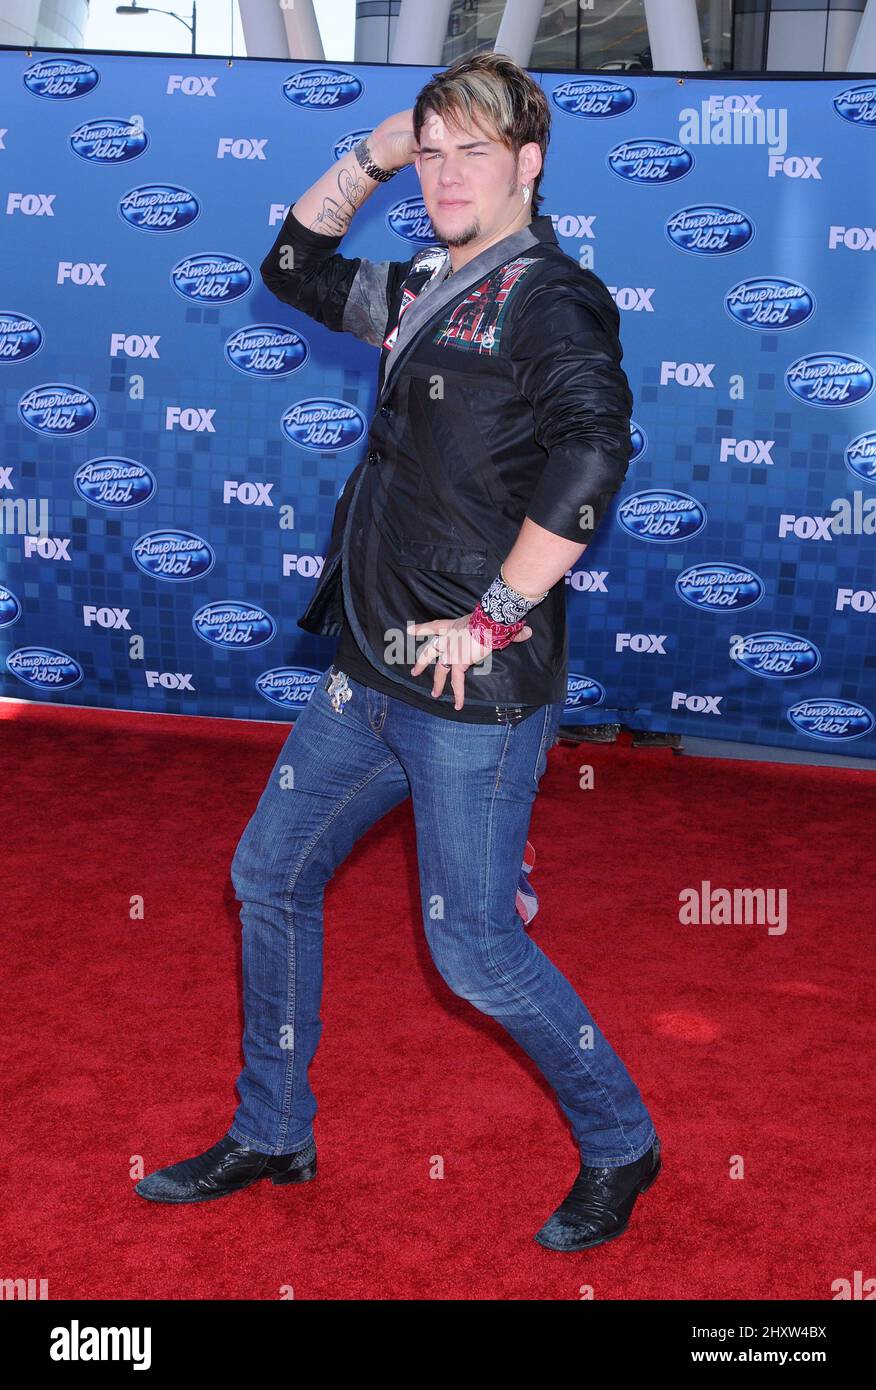 James Durbin during the American Idol Grand Finale 2011 held at Nokia Theatre L.A. Live, Los Angeles Stock Photo